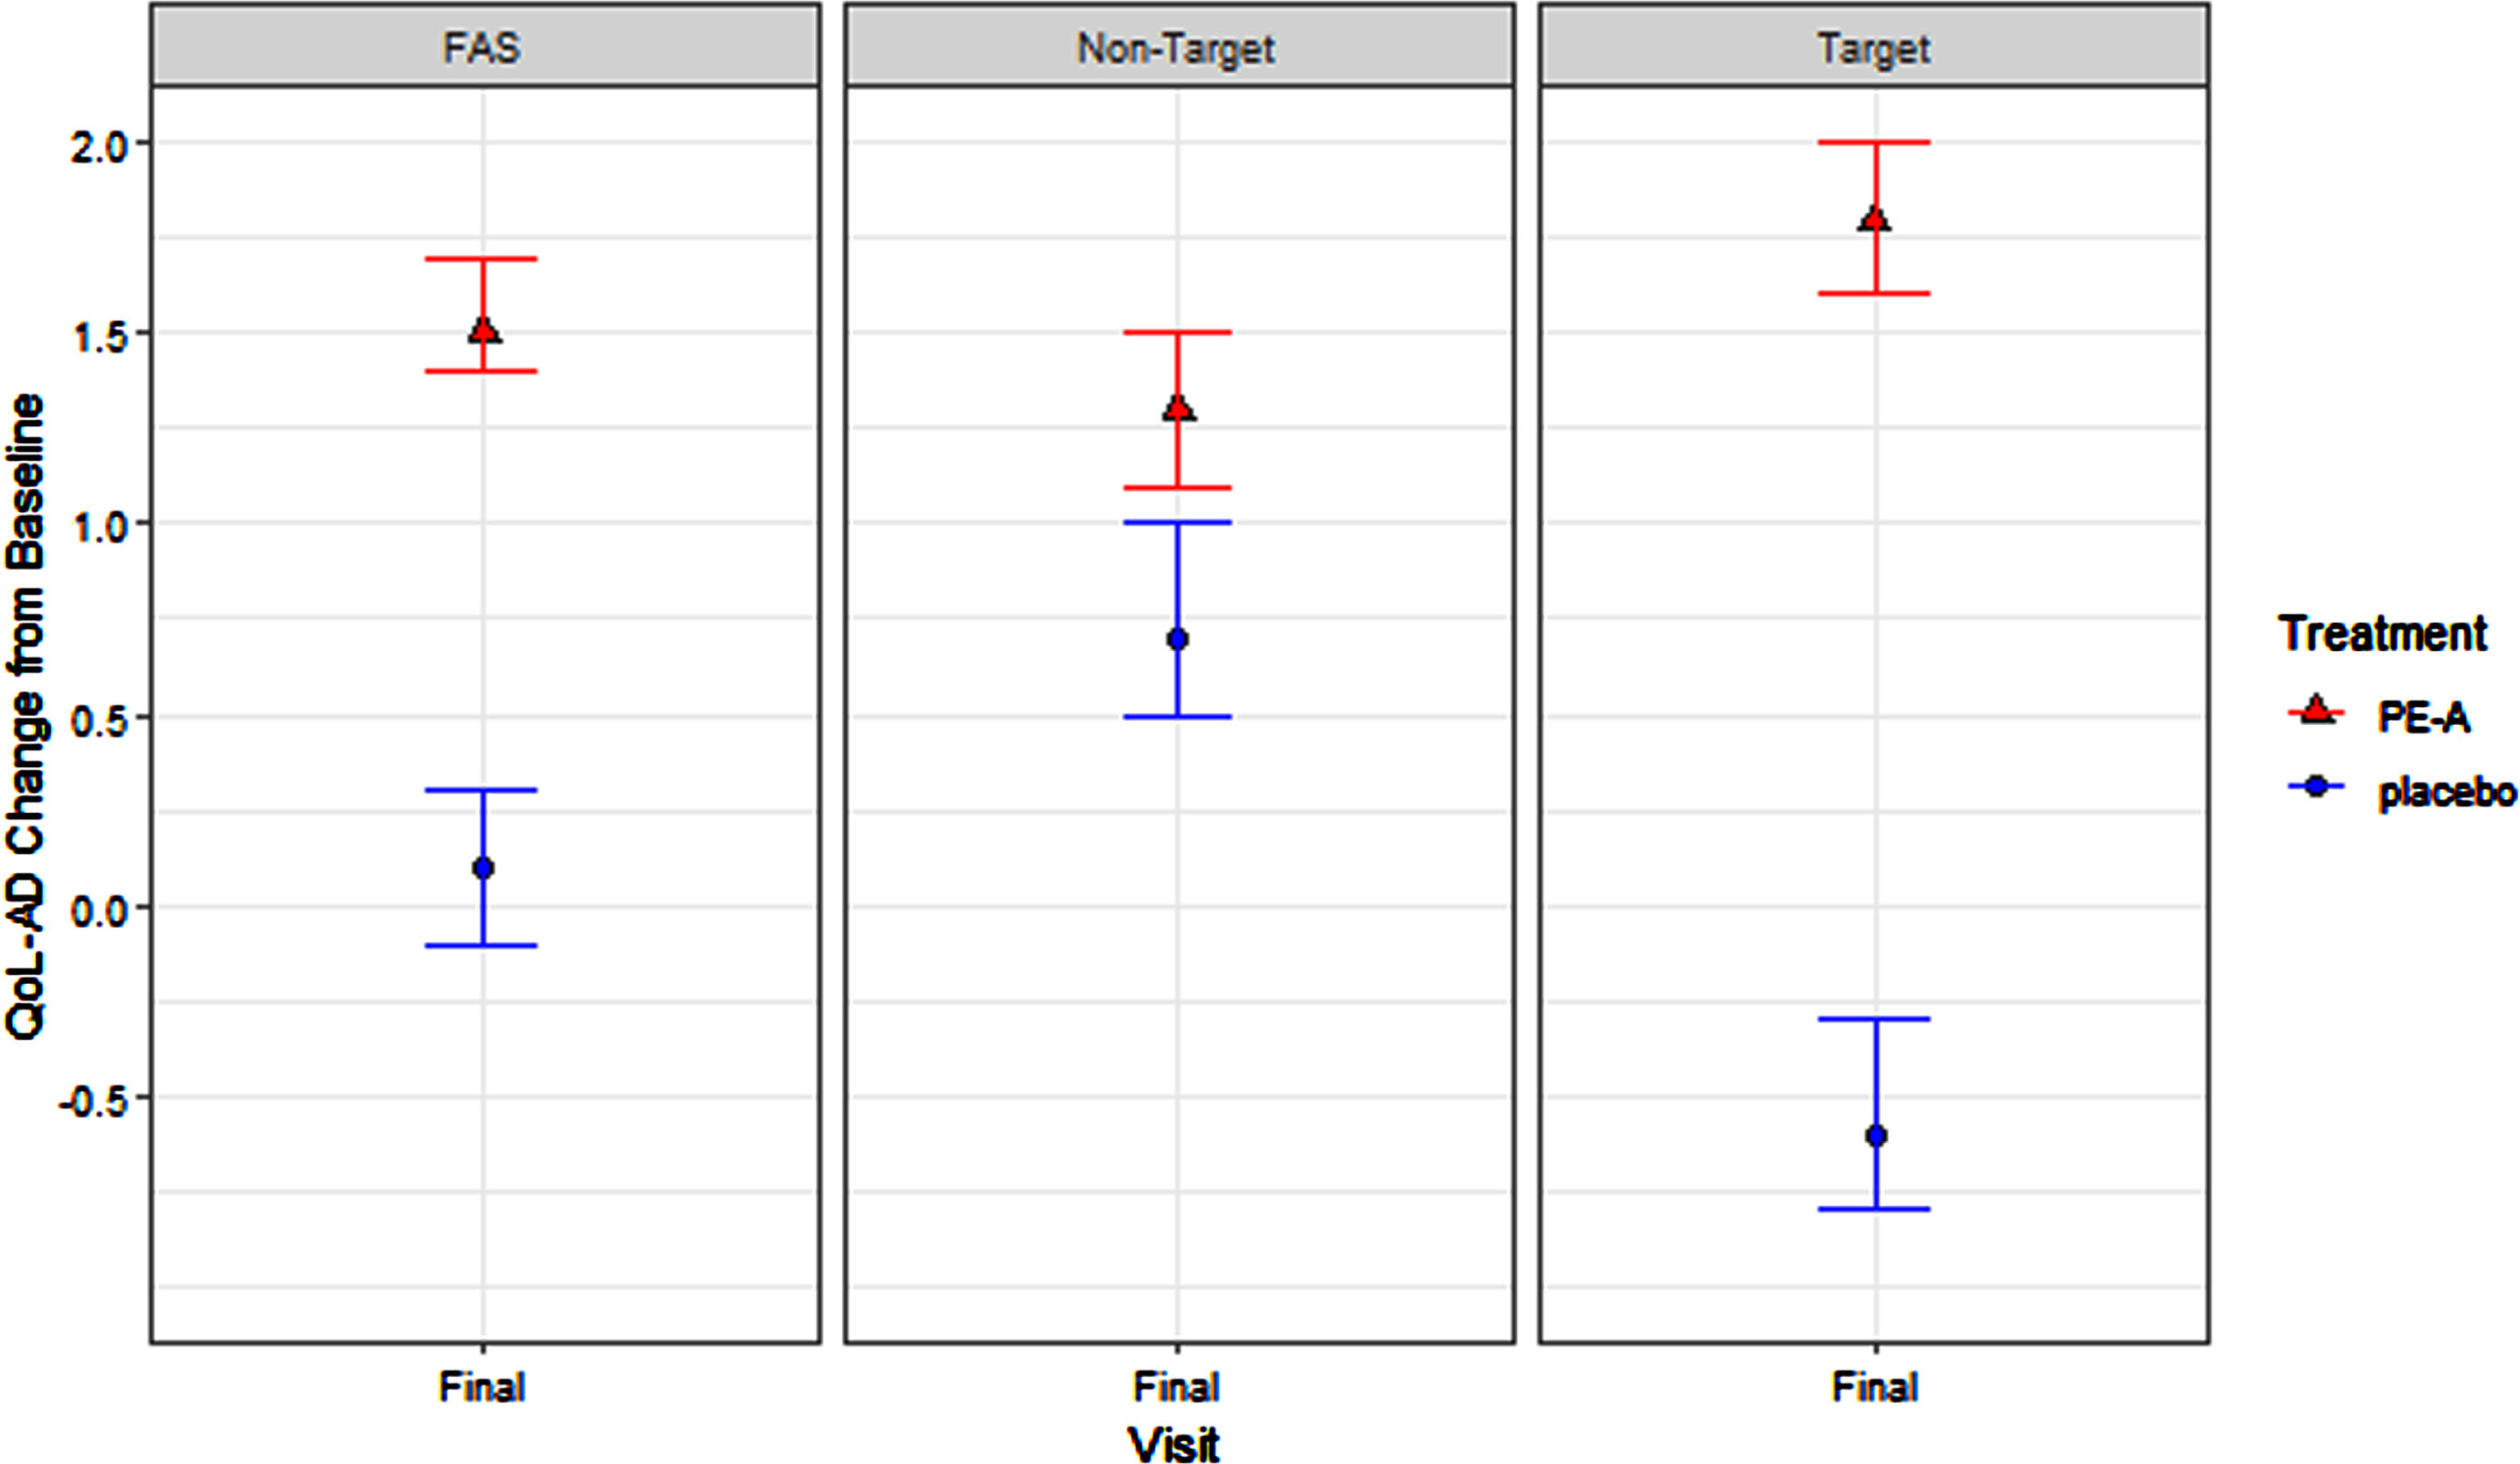 QoL-AD: Treatment Effect in FAS, Target, and Non-Target Stages.